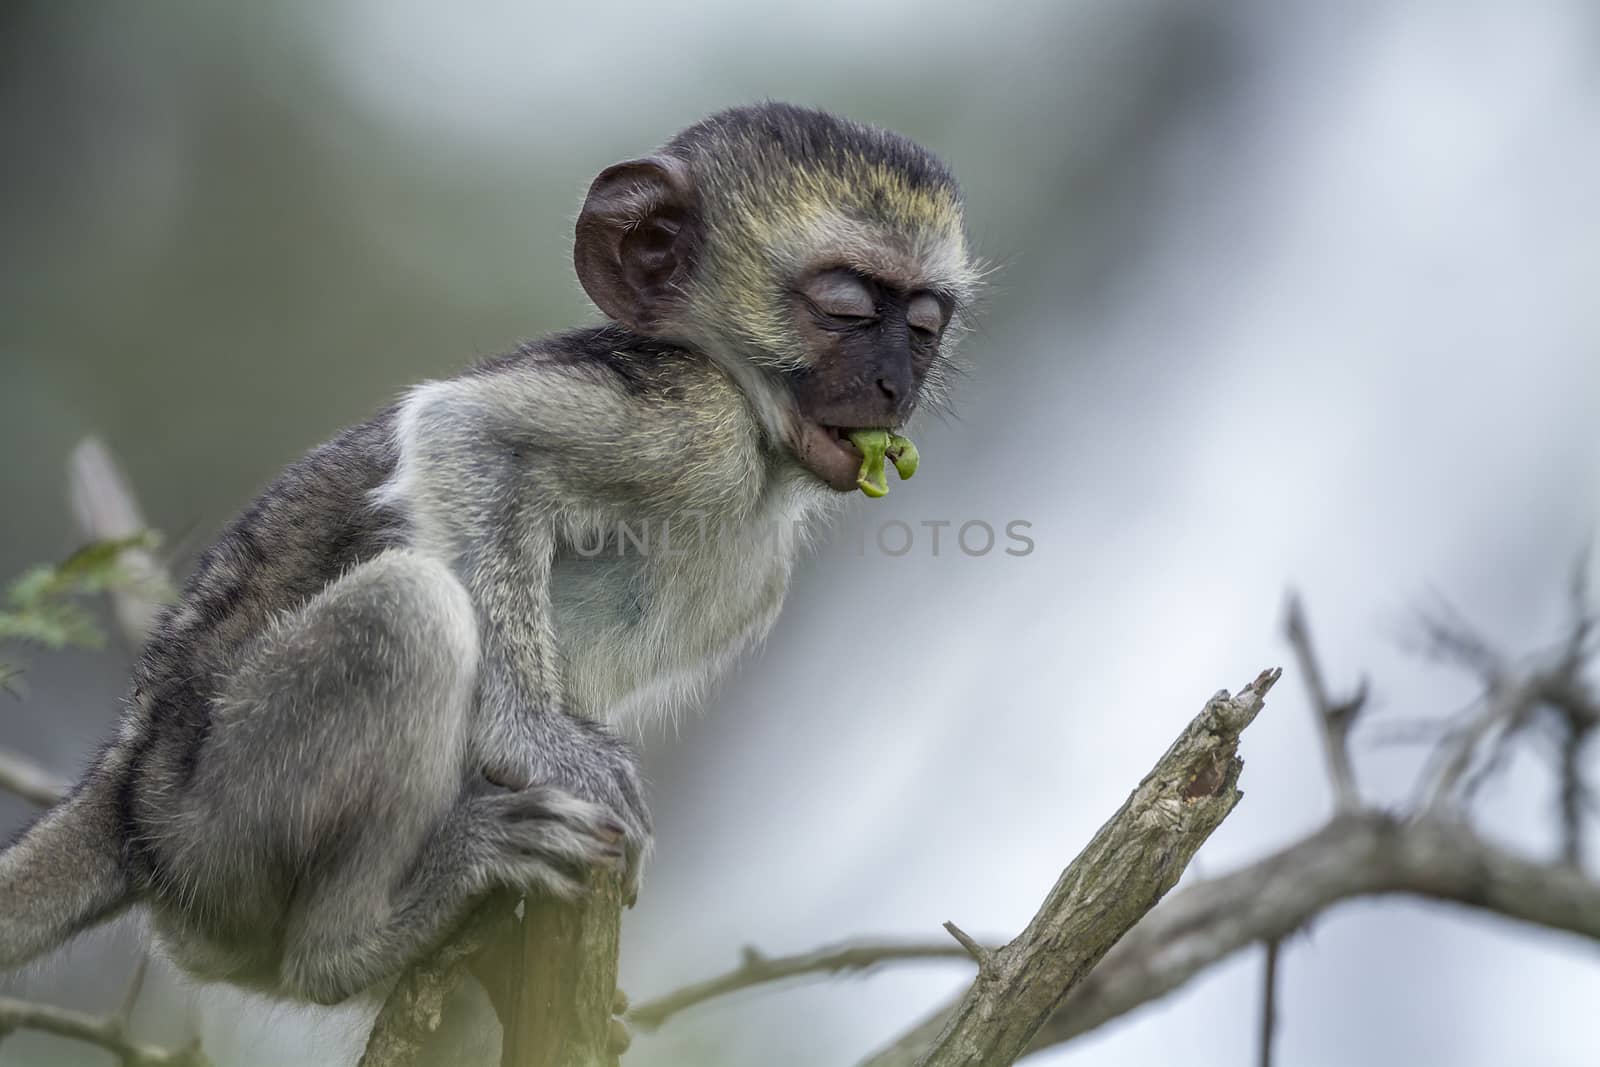 Young Vervet monkey eating a plant in Kruger National park, South Africa ; Specie Papio ursinus family of Cercopithecidae